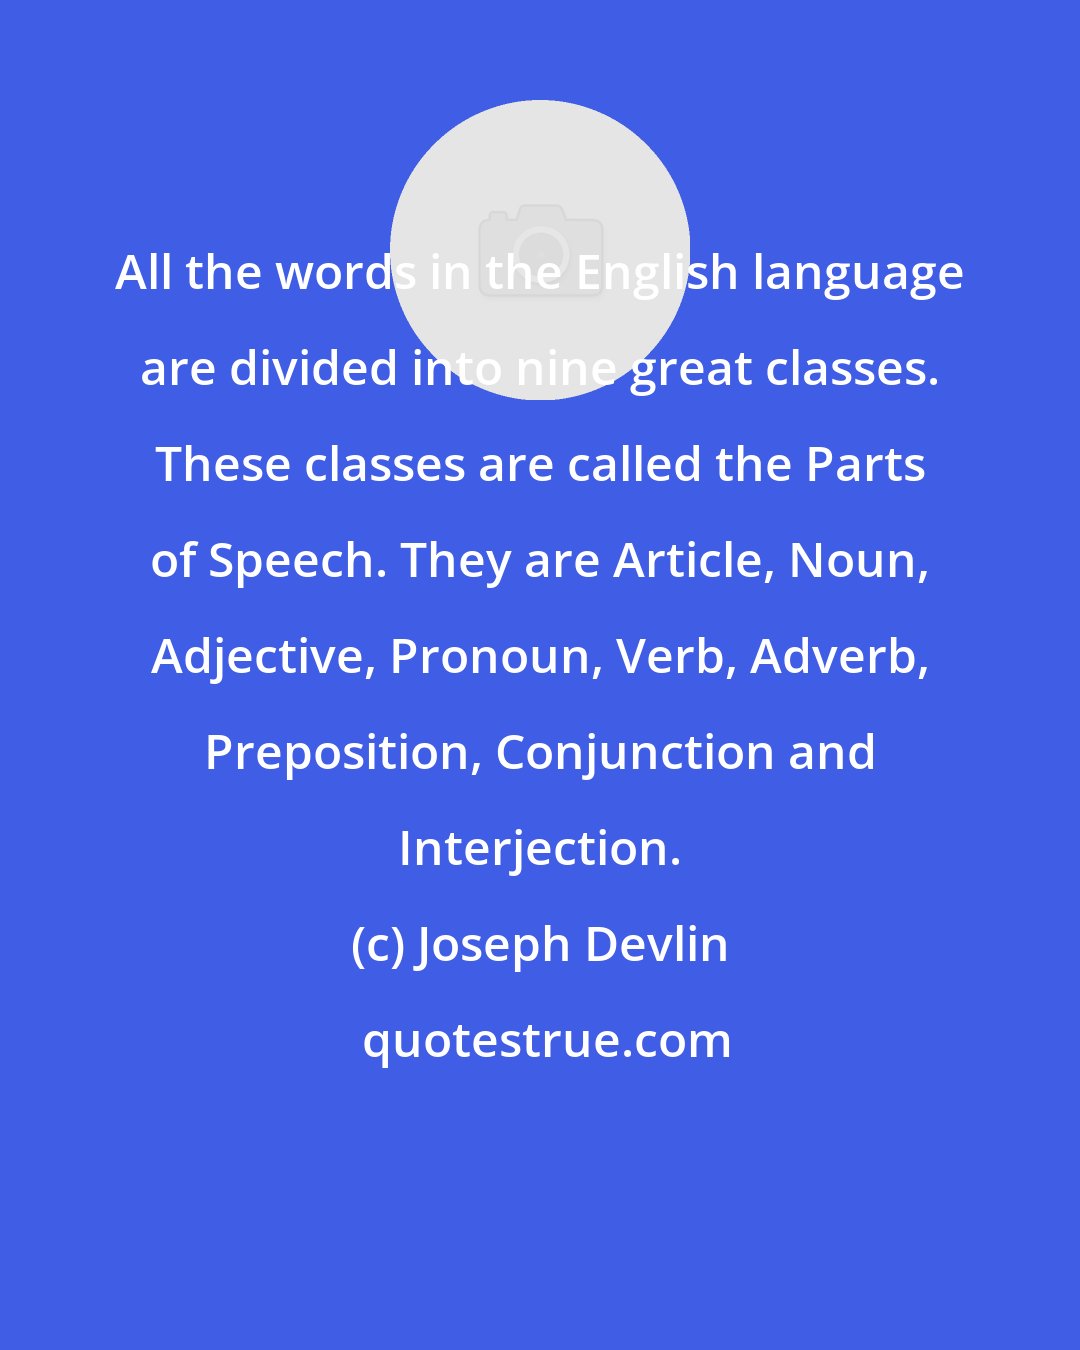 Joseph Devlin: All the words in the English language are divided into nine great classes. These classes are called the Parts of Speech. They are Article, Noun, Adjective, Pronoun, Verb, Adverb, Preposition, Conjunction and Interjection.